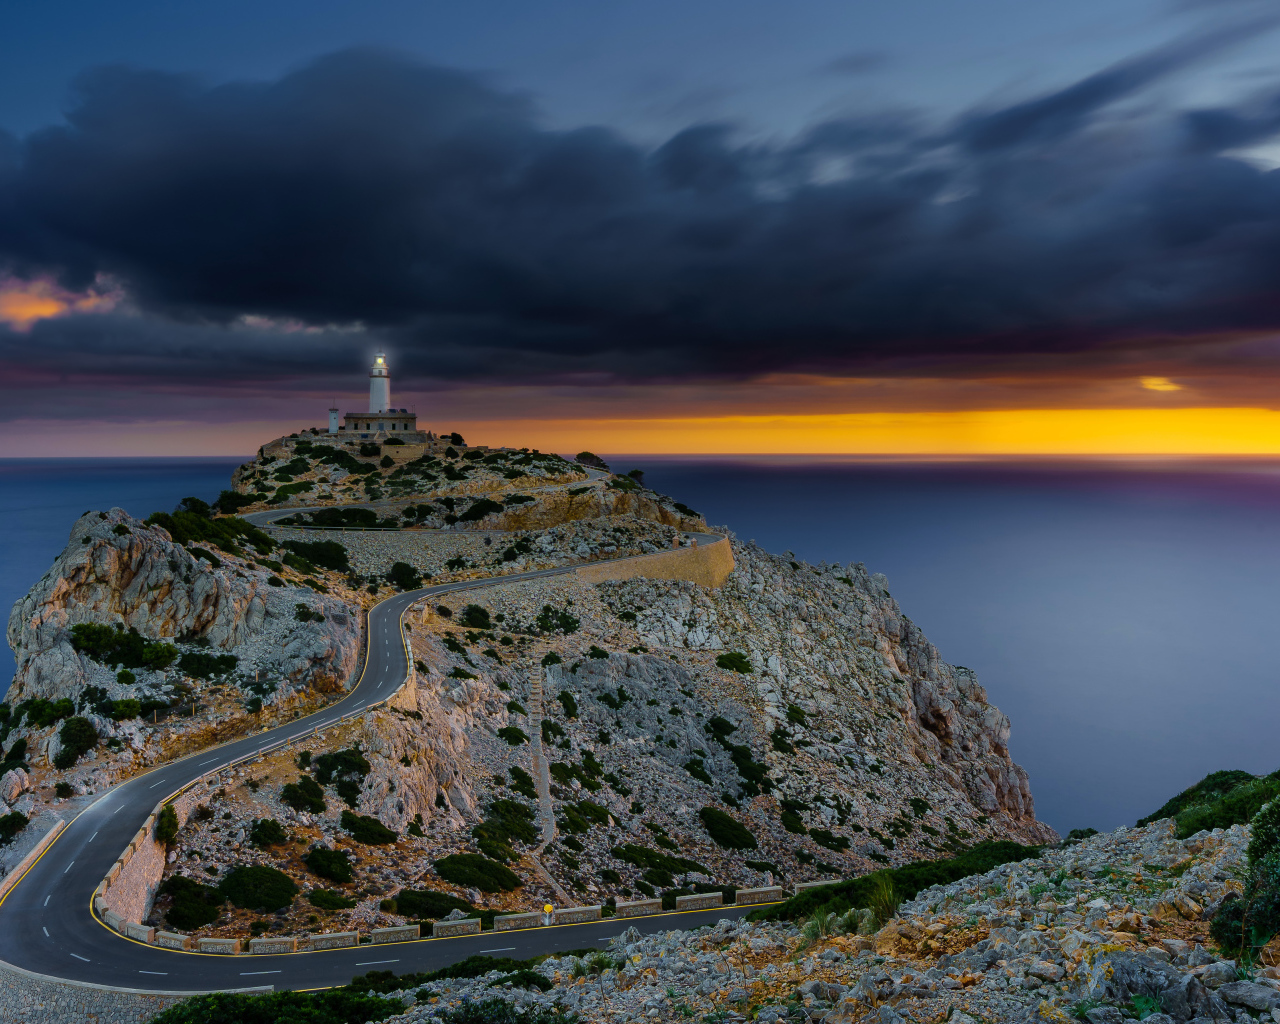 A winding road leads to a lighthouse on the edge of a cliff under a cloudy sky